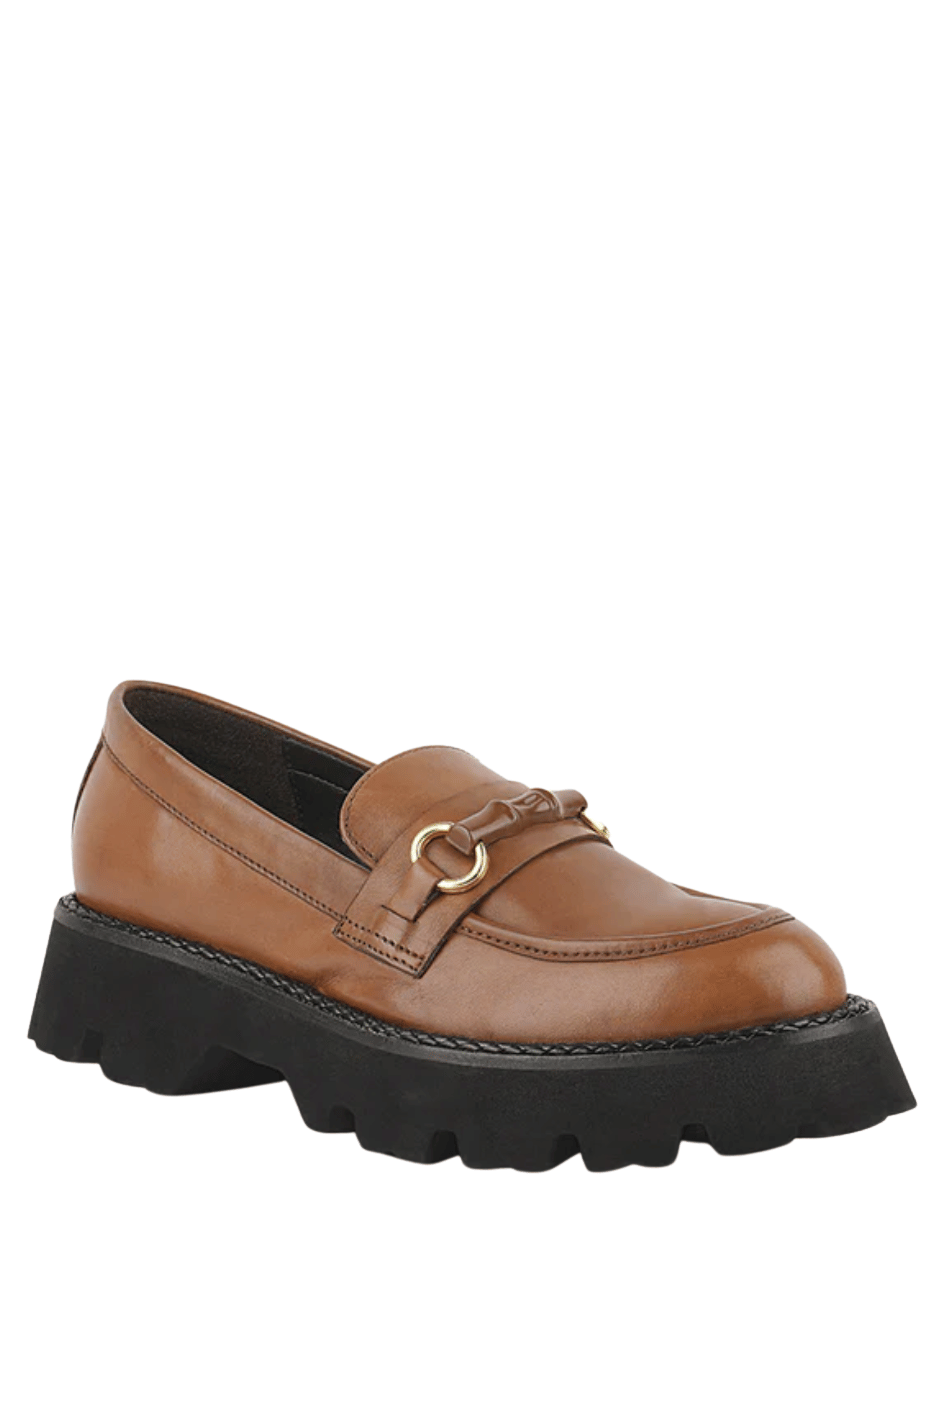 Cheviot Chunky Leather Loafers - Expressive Collective CO.